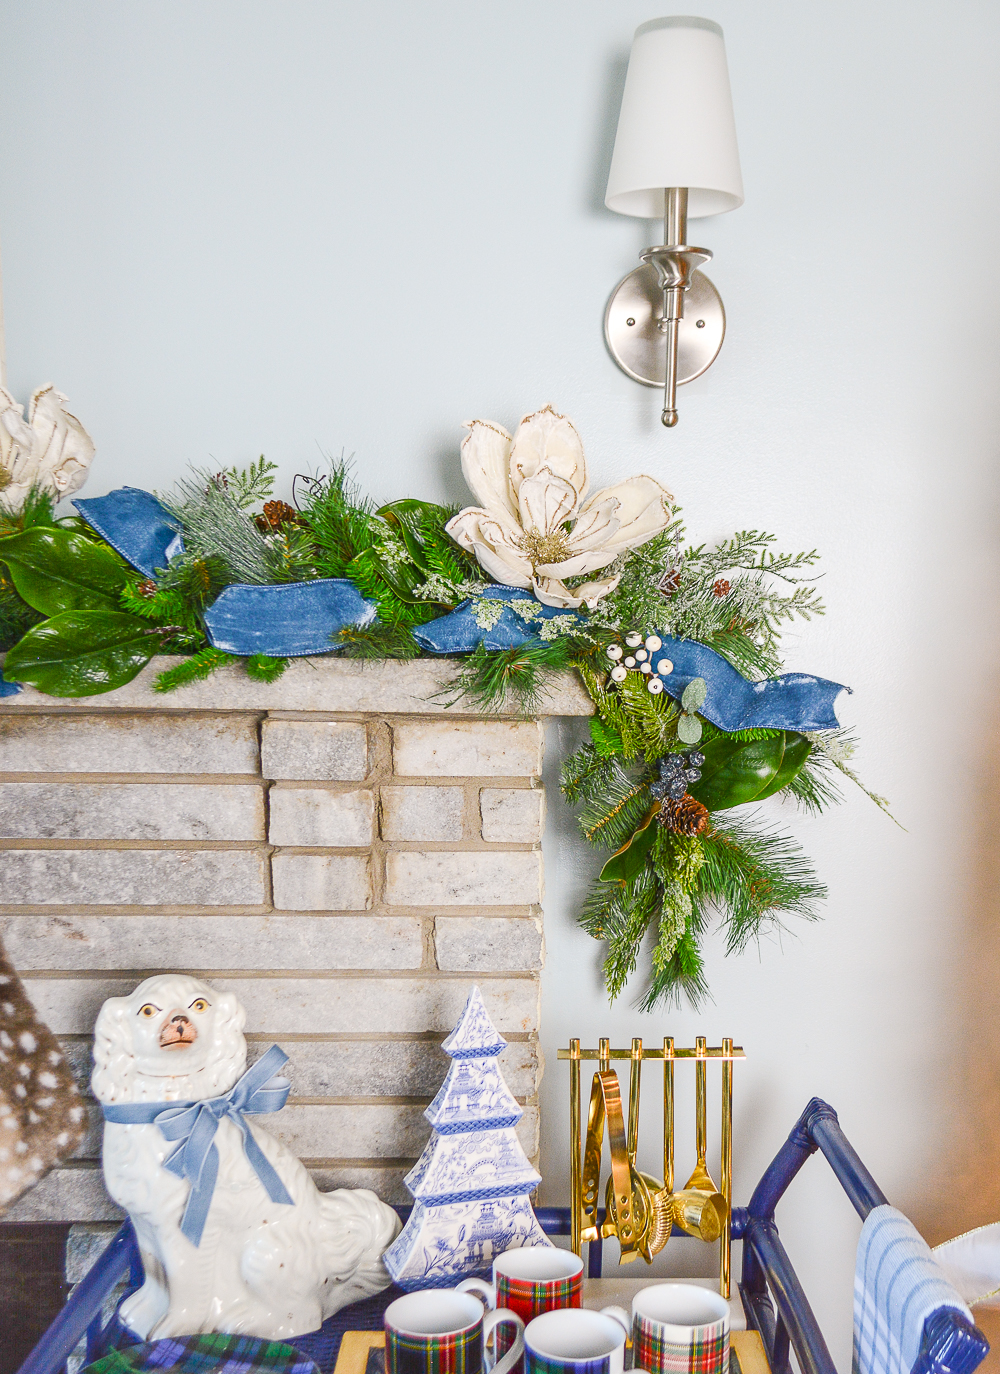 A frosted winter pine and magnolia garland perfect for that winter wonderland holiday look!